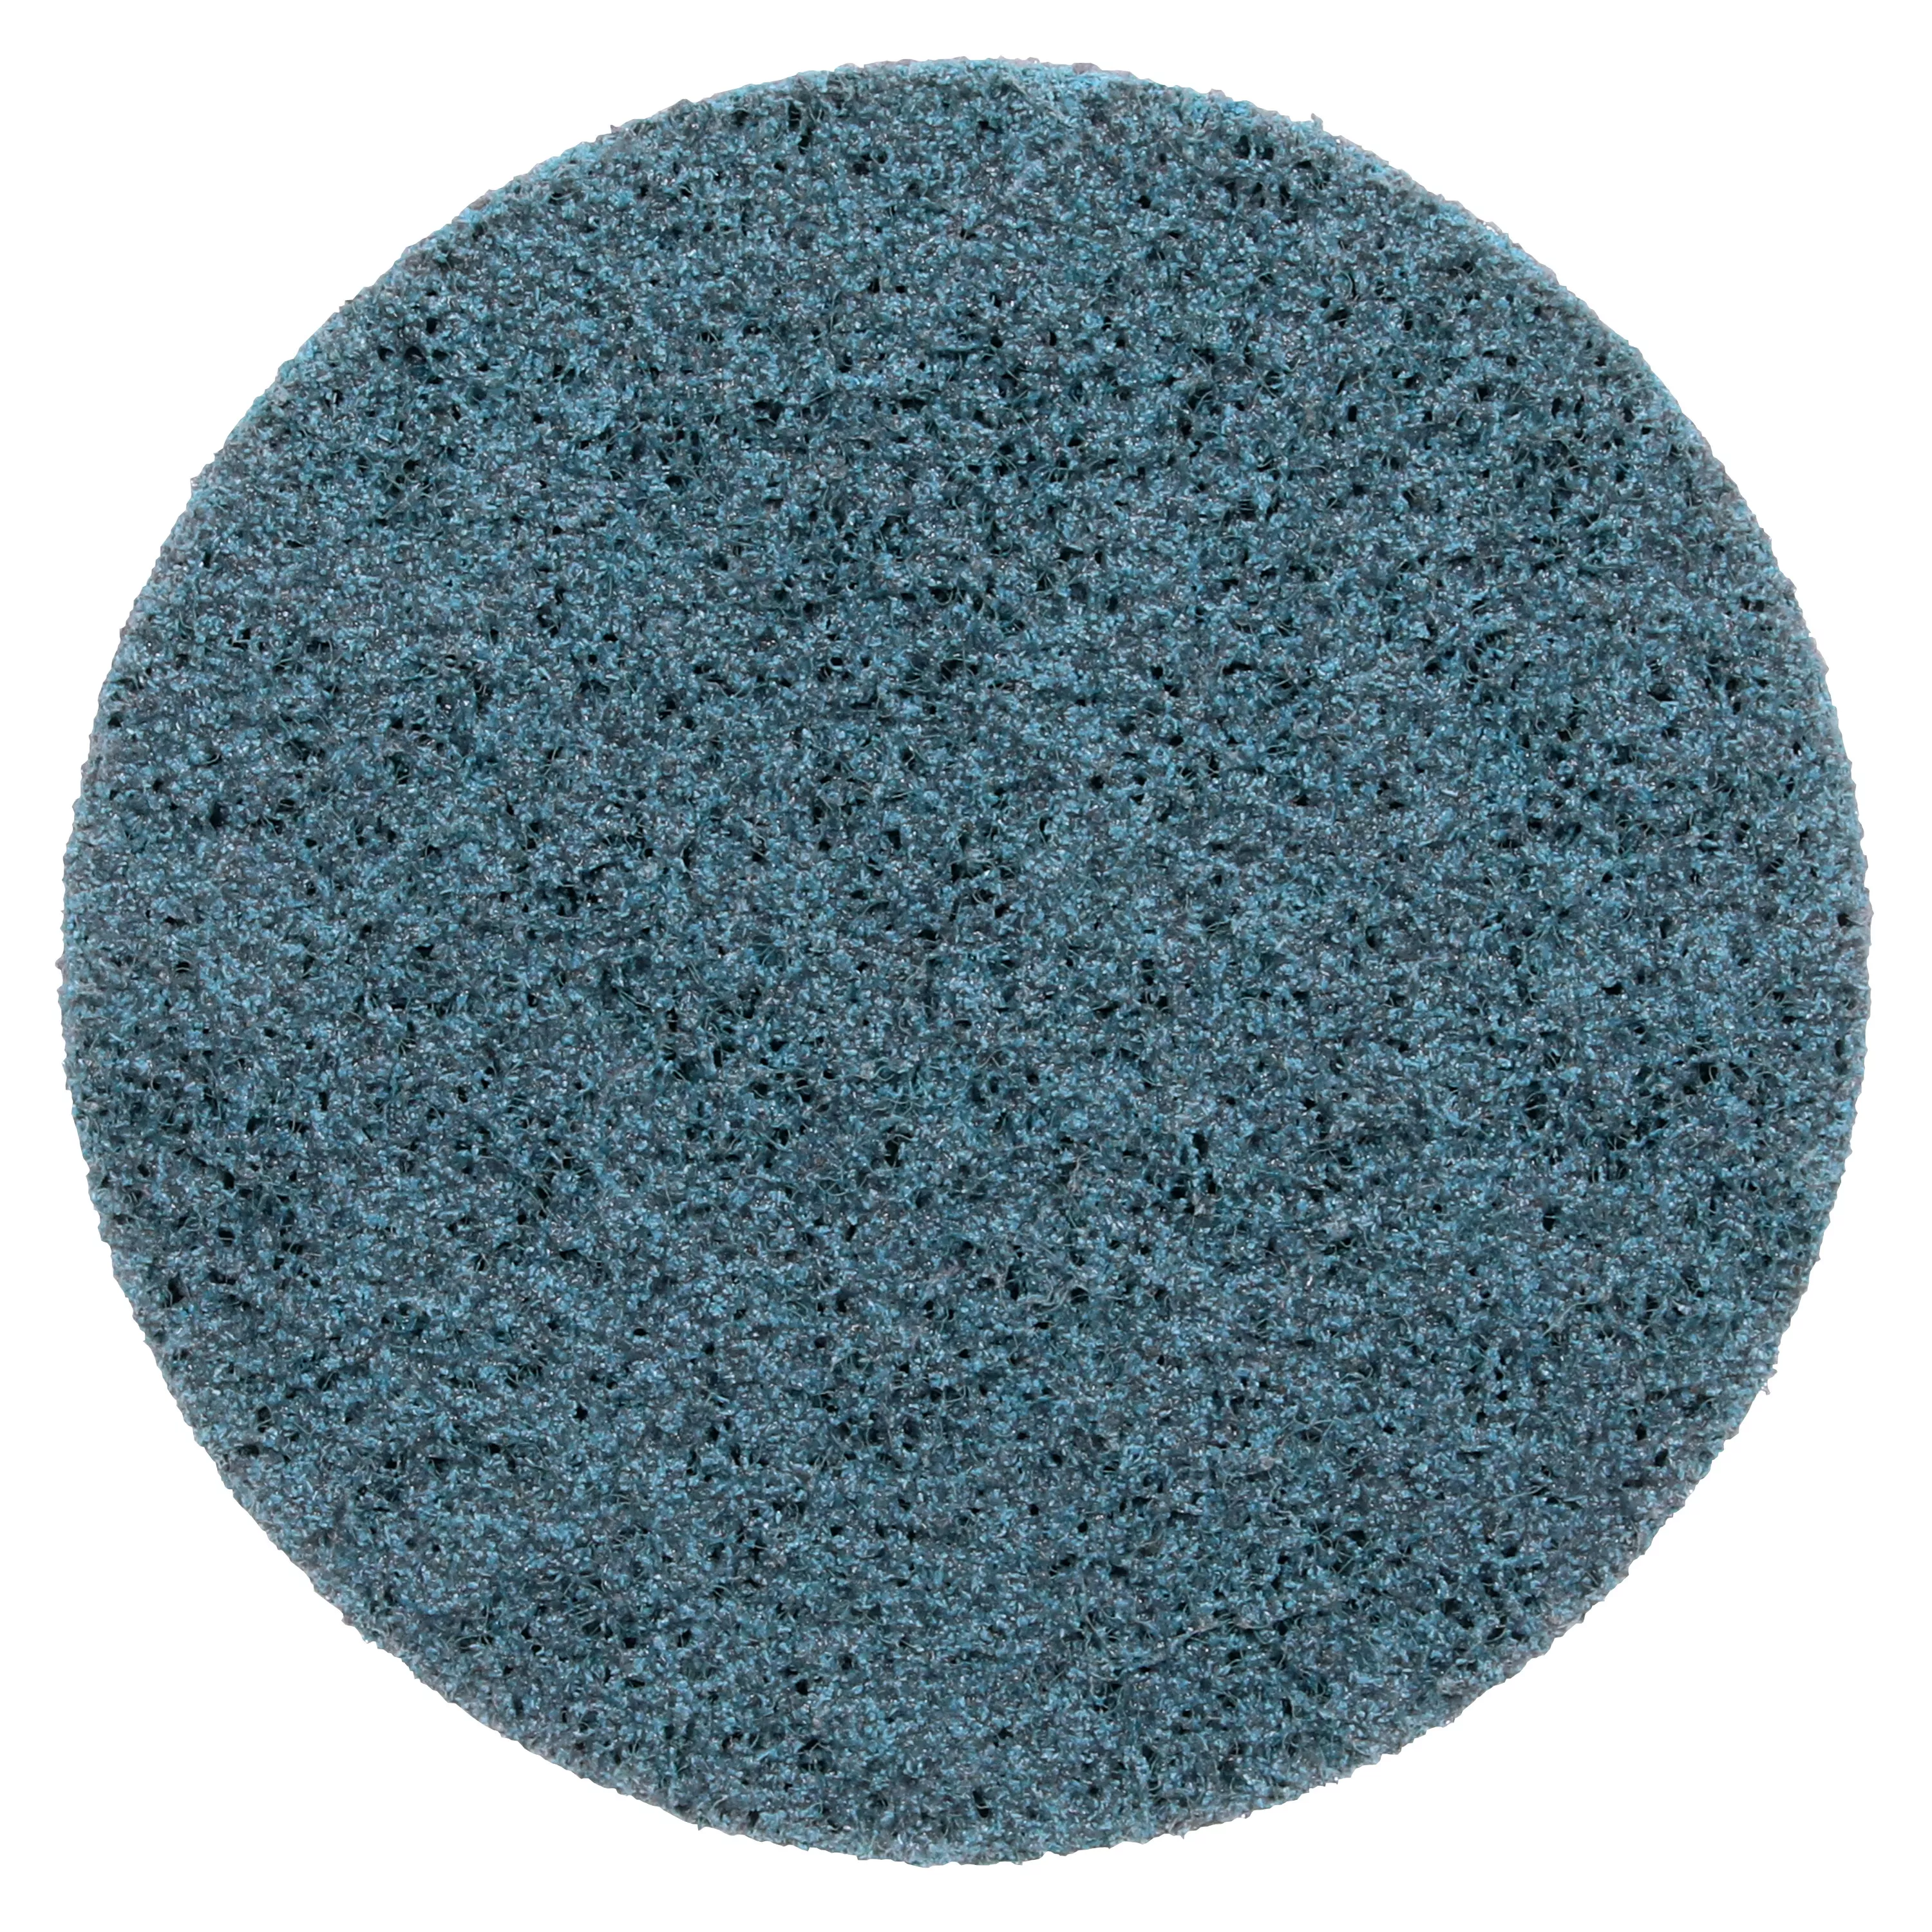 Product Number GB-DN | Scotch-Brite™ Light Grinding and Blending TN Quick Change Disc